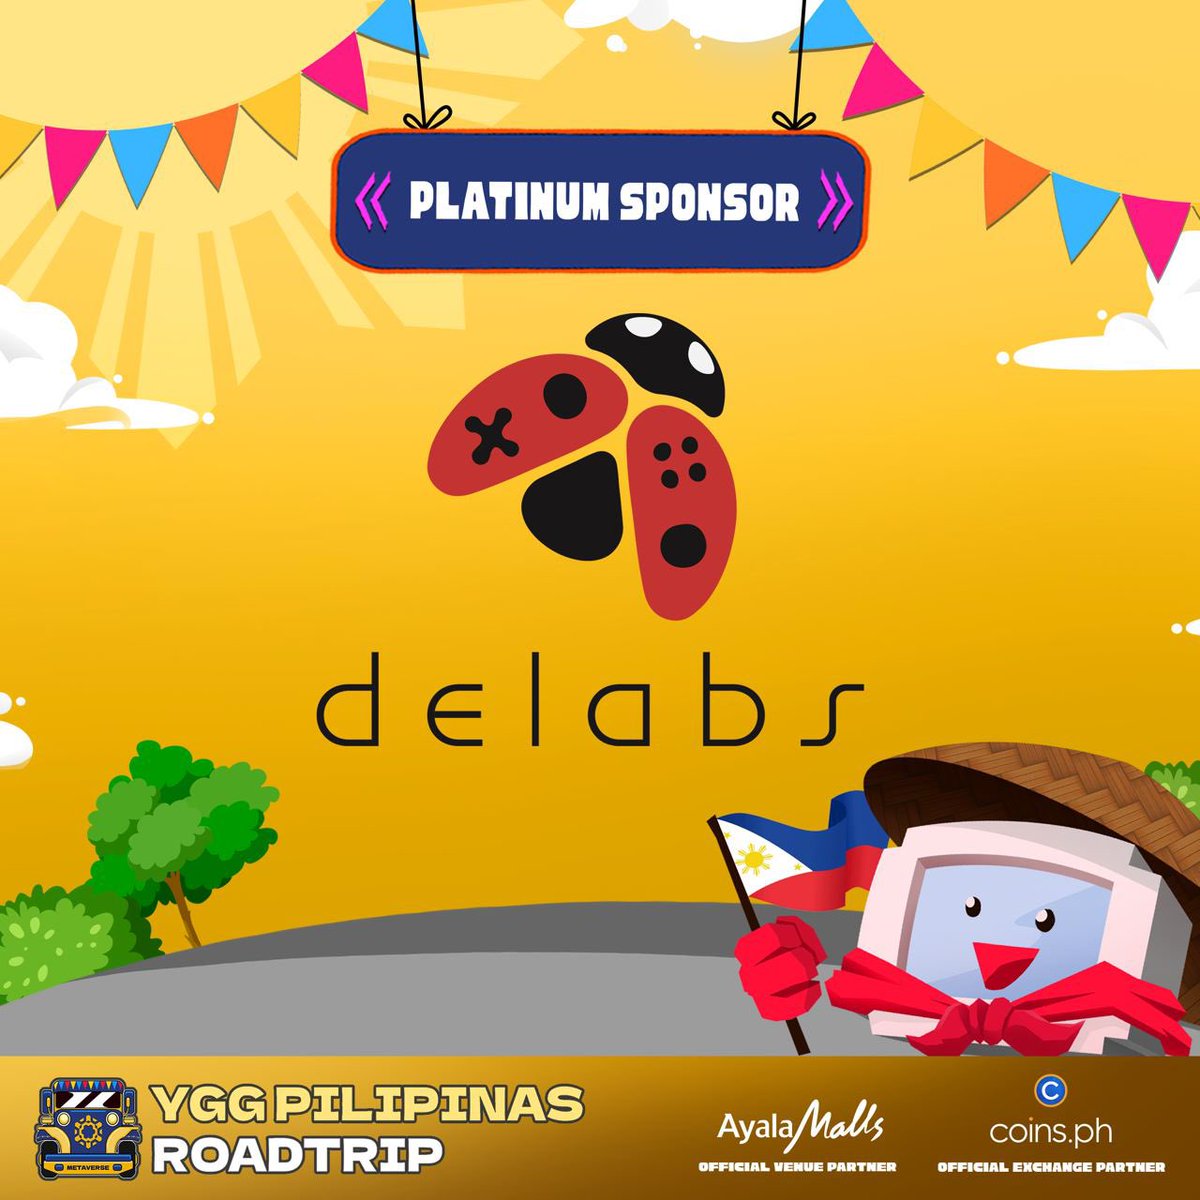 Don’t miss out on @delabsOfficial as our Platinum Sponsor for the upcoming #YGGRoadtrip2024! 🔥 Check out their socials: delabs.gg discord.gg/delabsOfficial Secure your spot and sign up here: lu.ma/rdtrpbatangas #YGGRoadtrip2024 #BiyahengWeb3